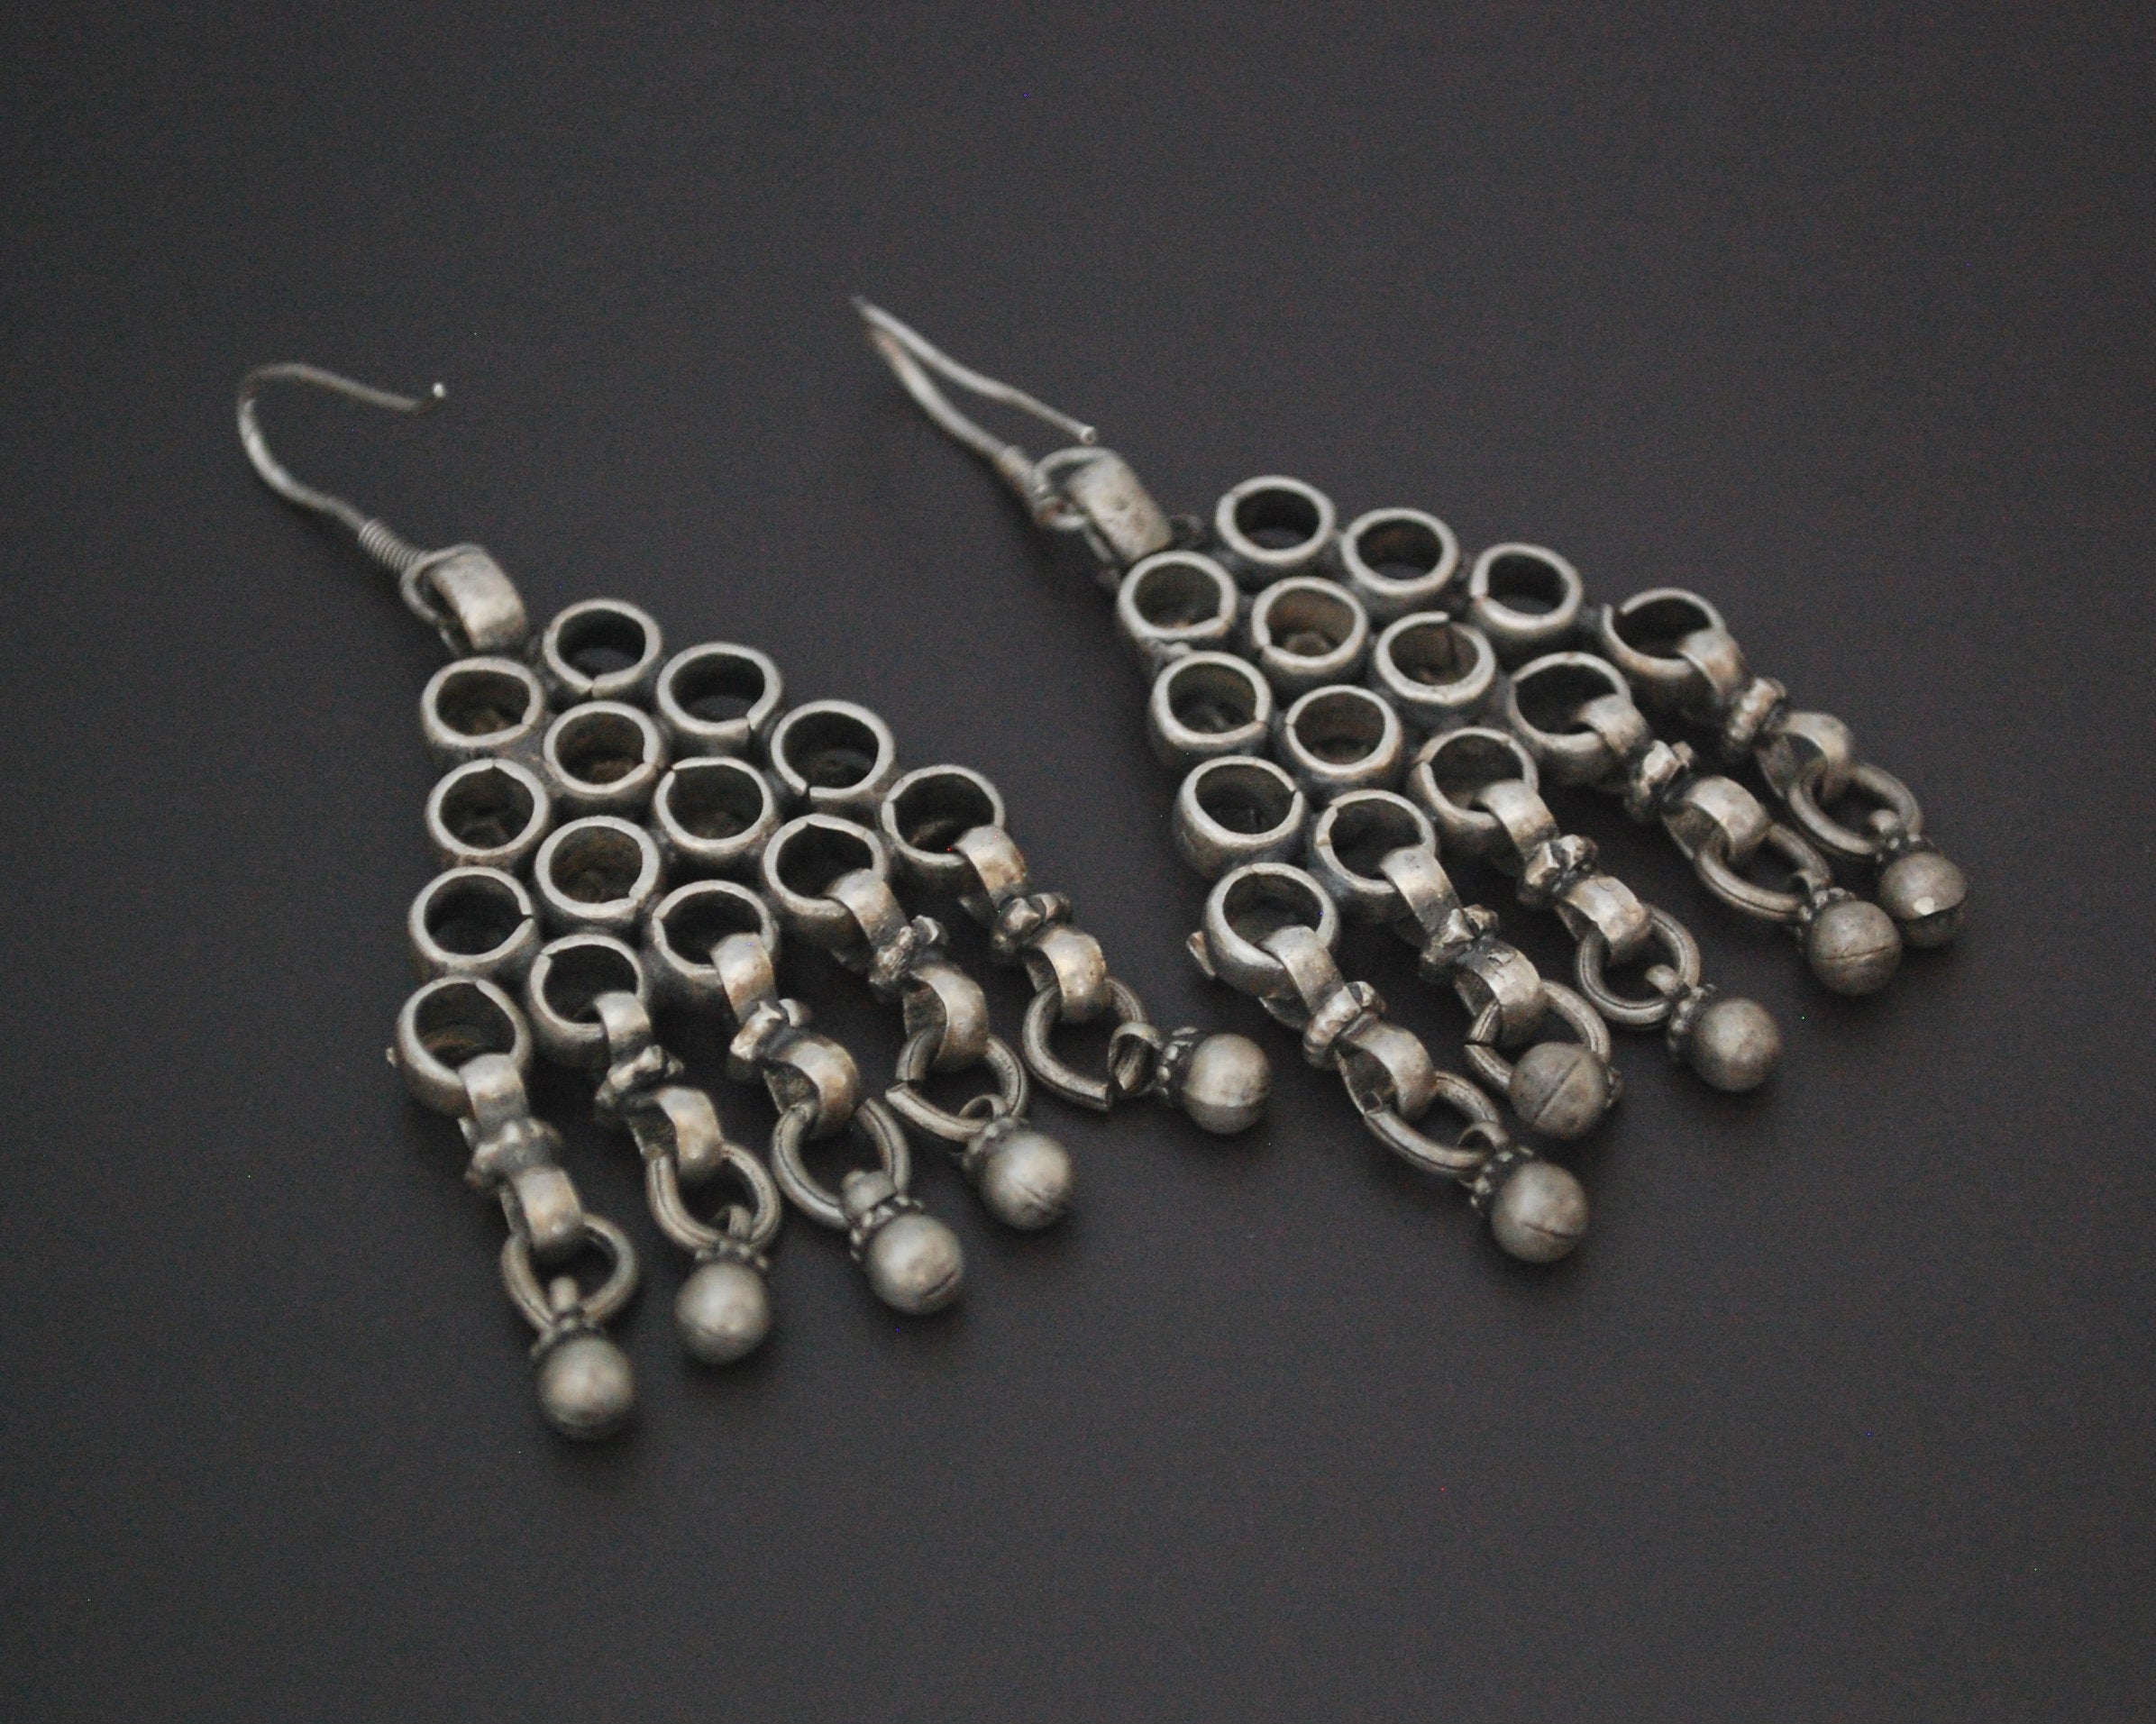 Indian Tribal Earrings with Bell Dangles